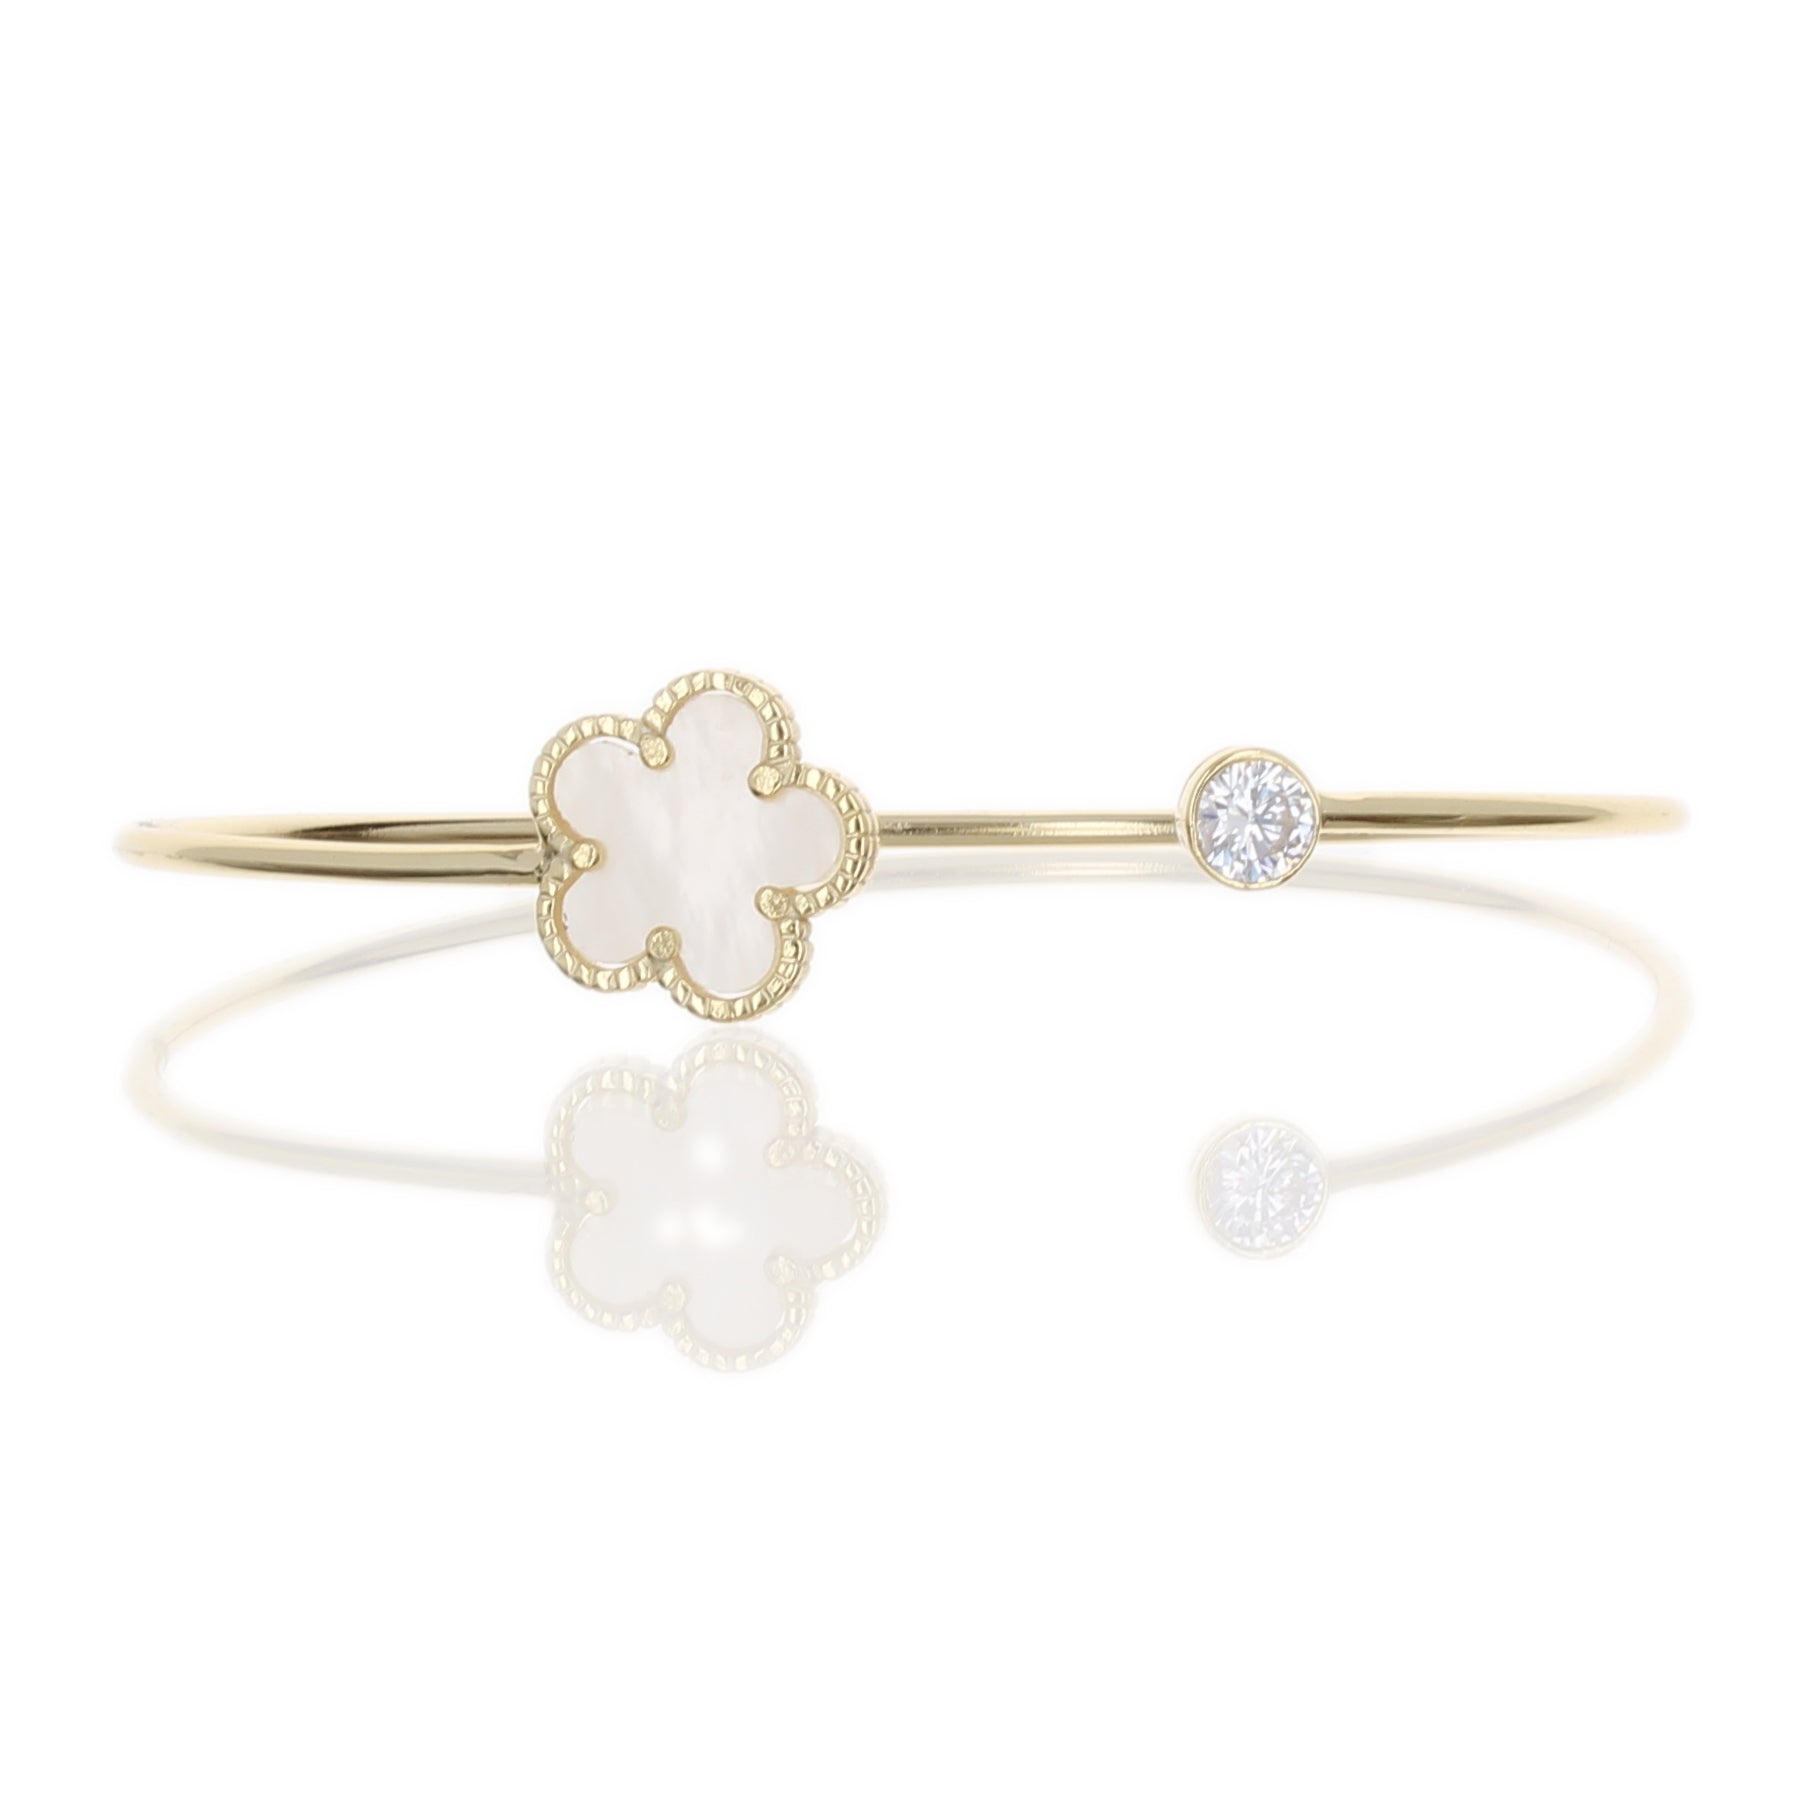 MOTHER OF PEARL FLOWER & CZ BANGLE